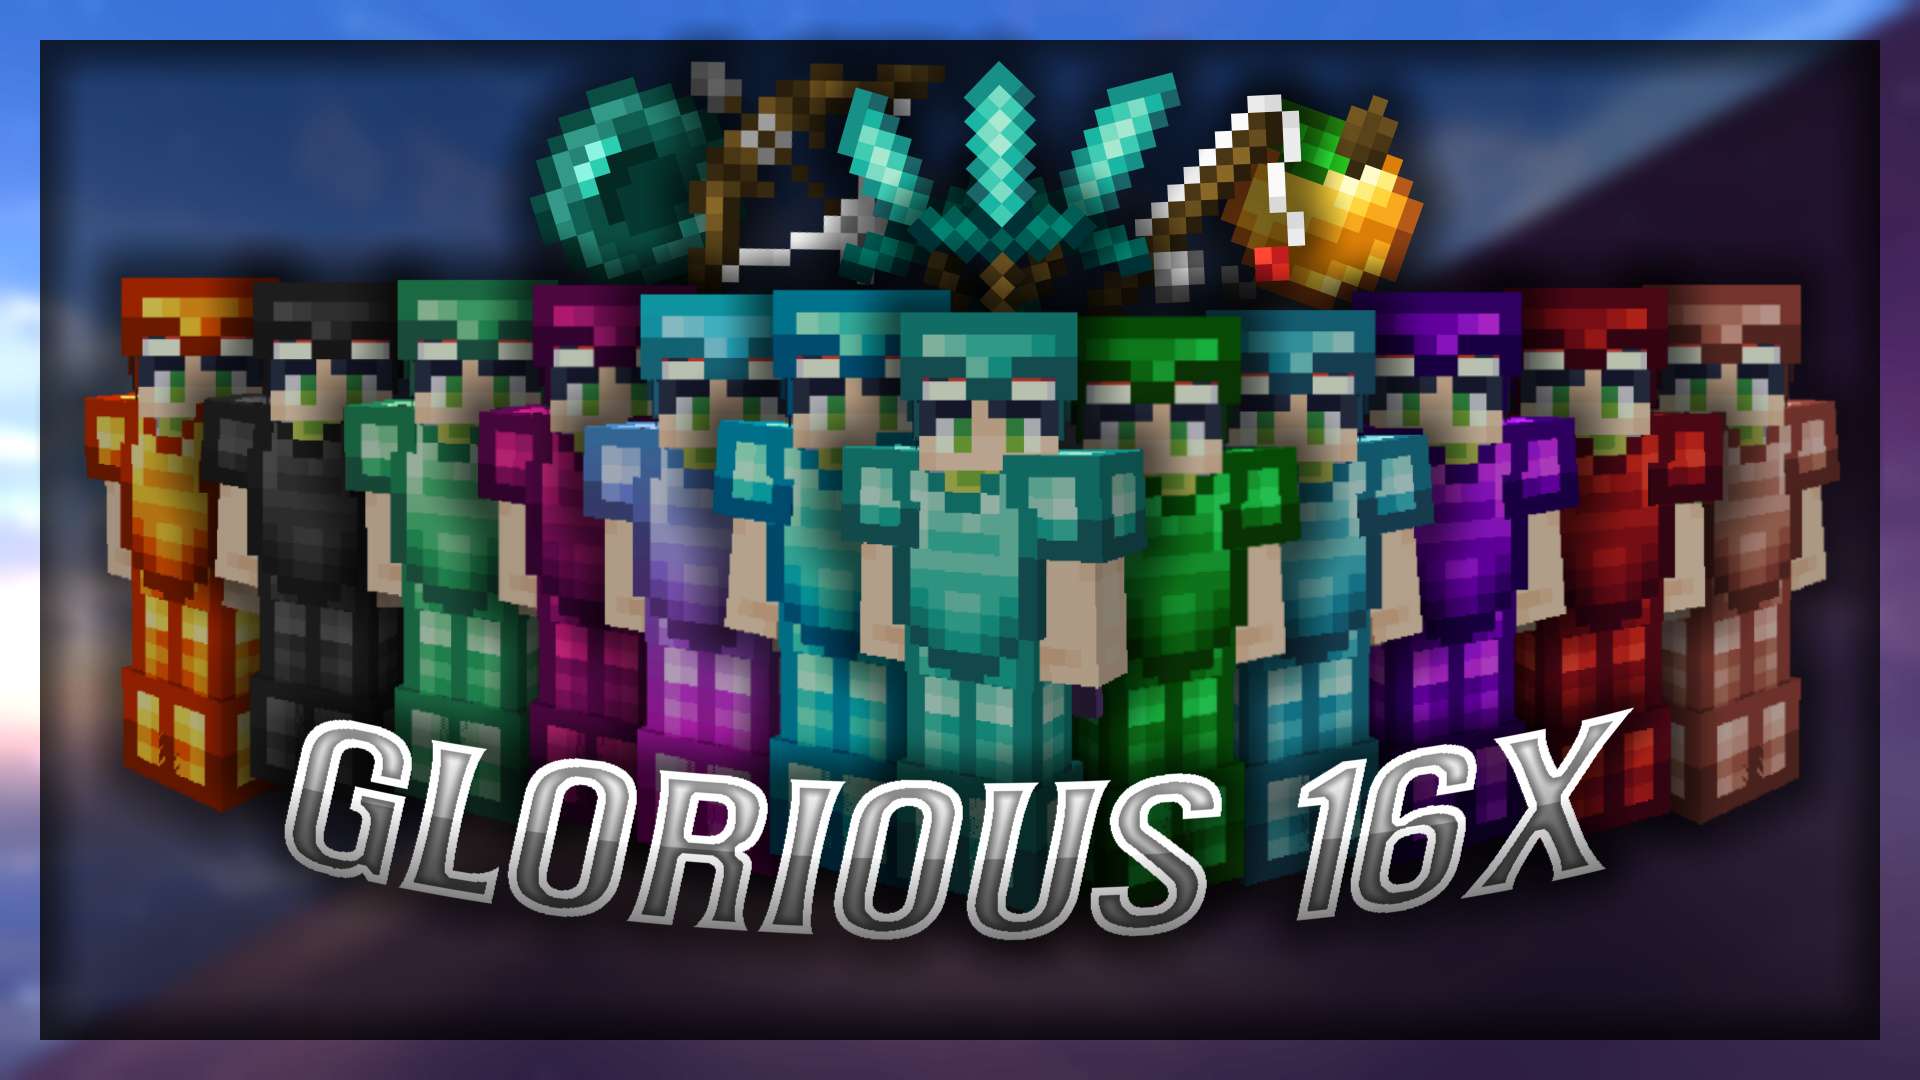 (open zip with WinRAR) Glorious - Marine 16x by Mek on PvPRP